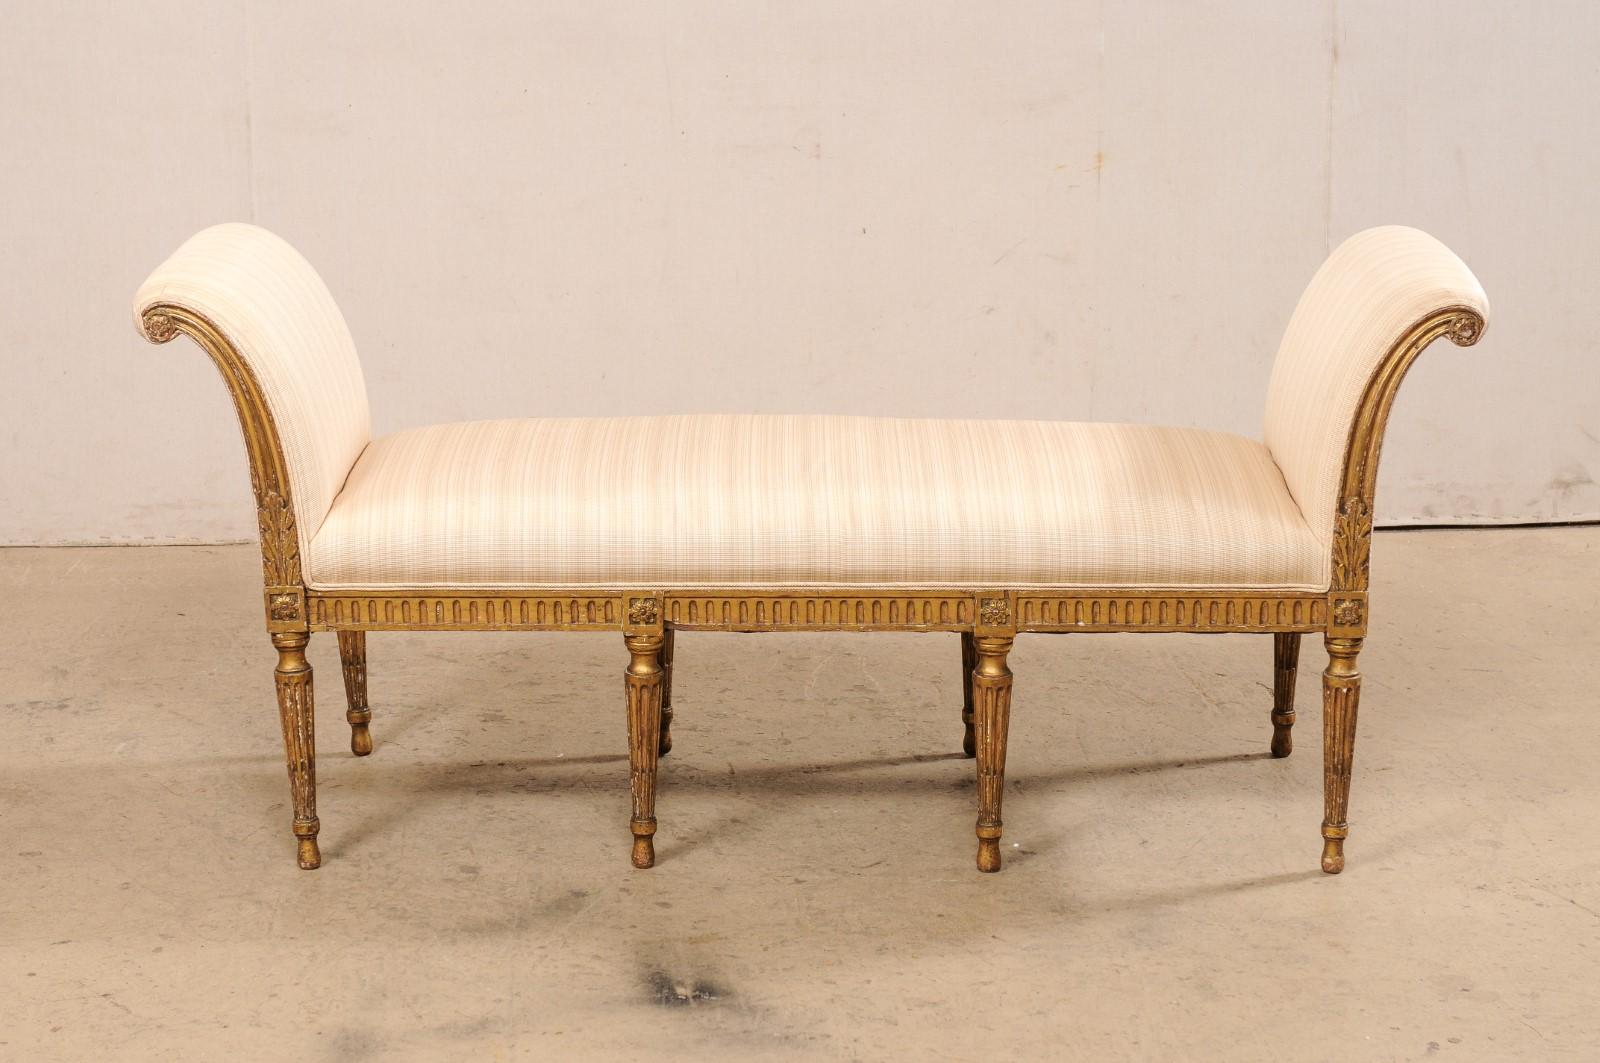 Upholstery French Louis XVI Style Scroll Arm Window Bench, Late 19th Century